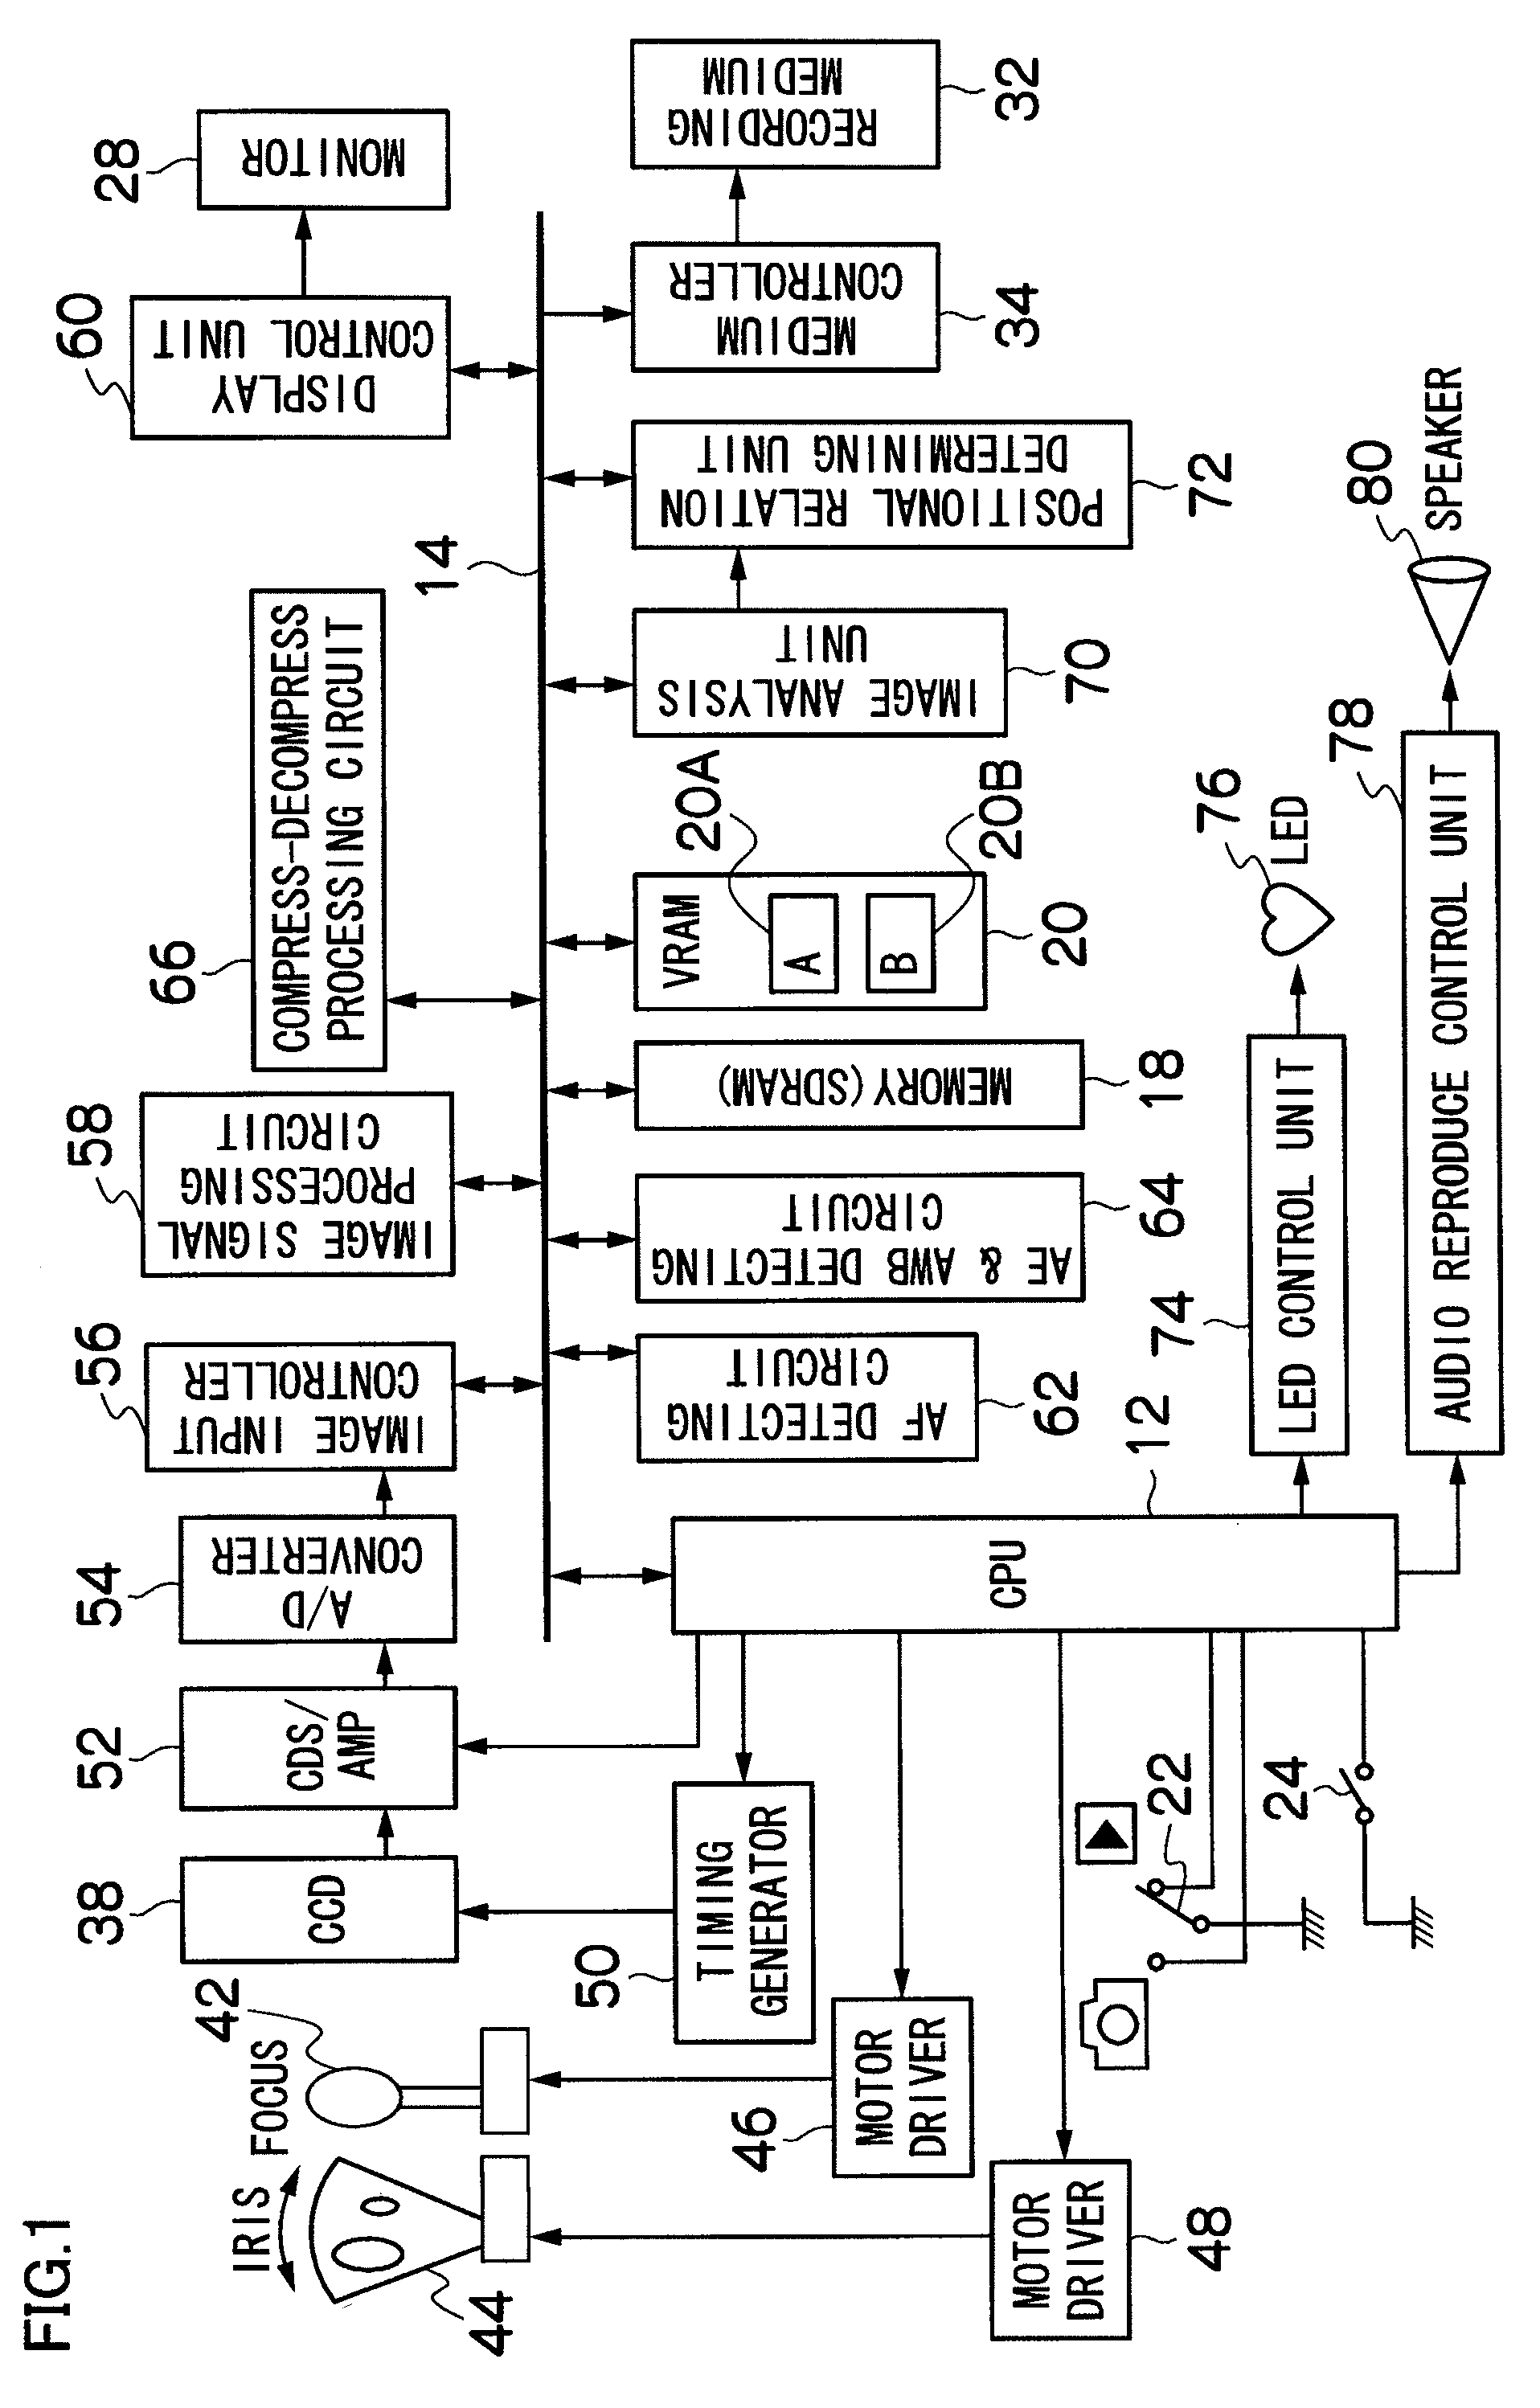 Image capturing apparatus and method for controlling image capturing